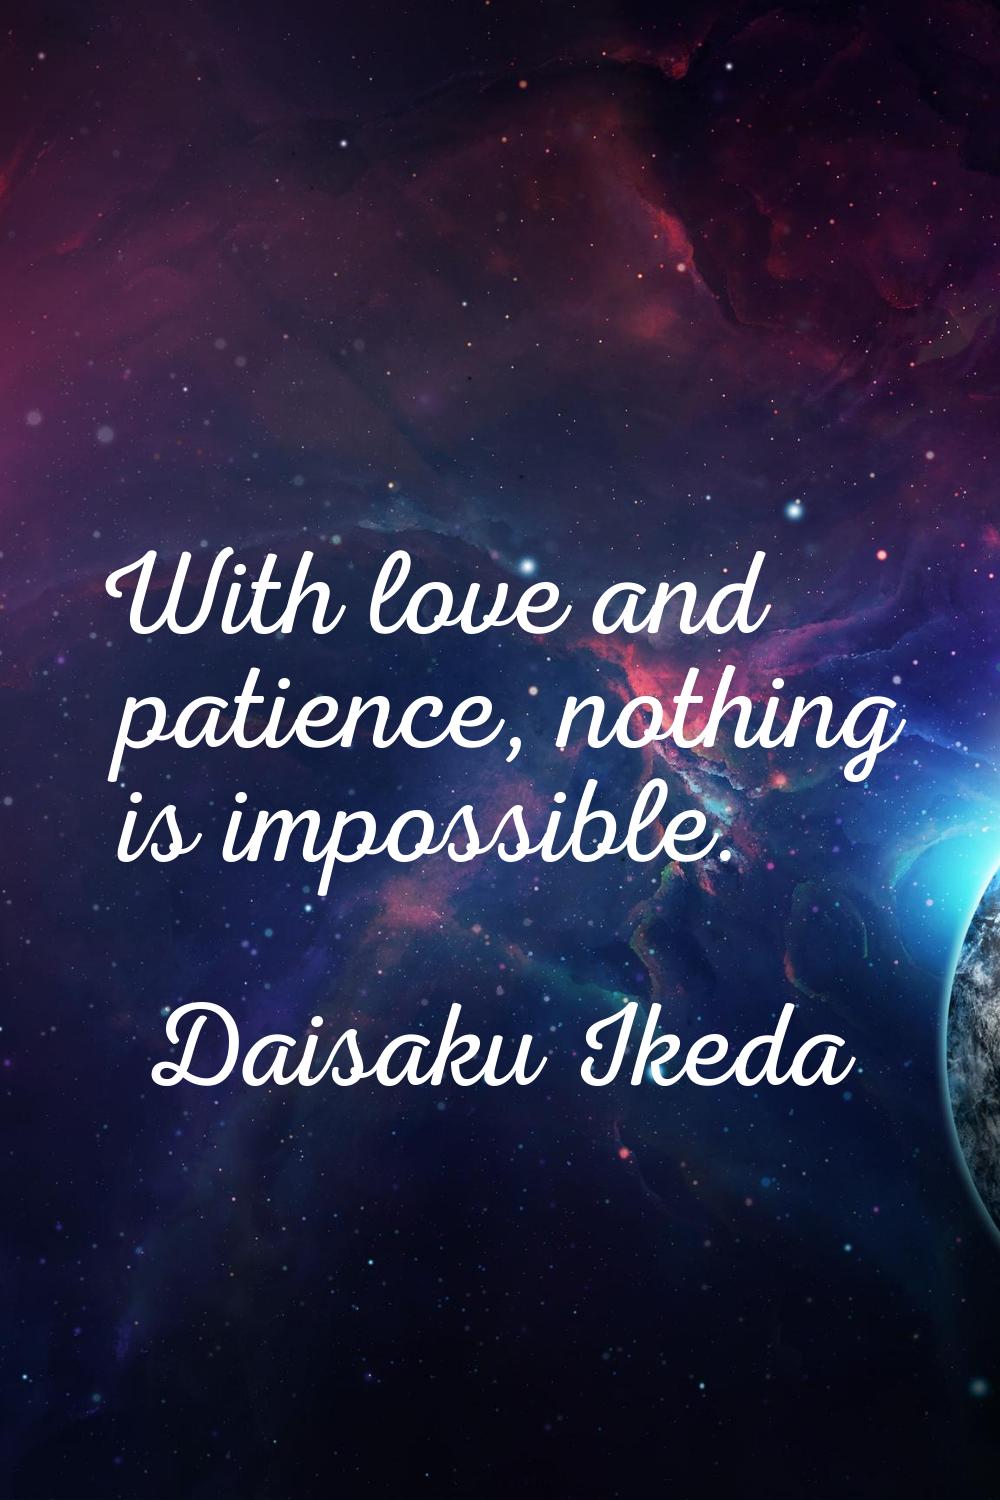 With love and patience, nothing is impossible.